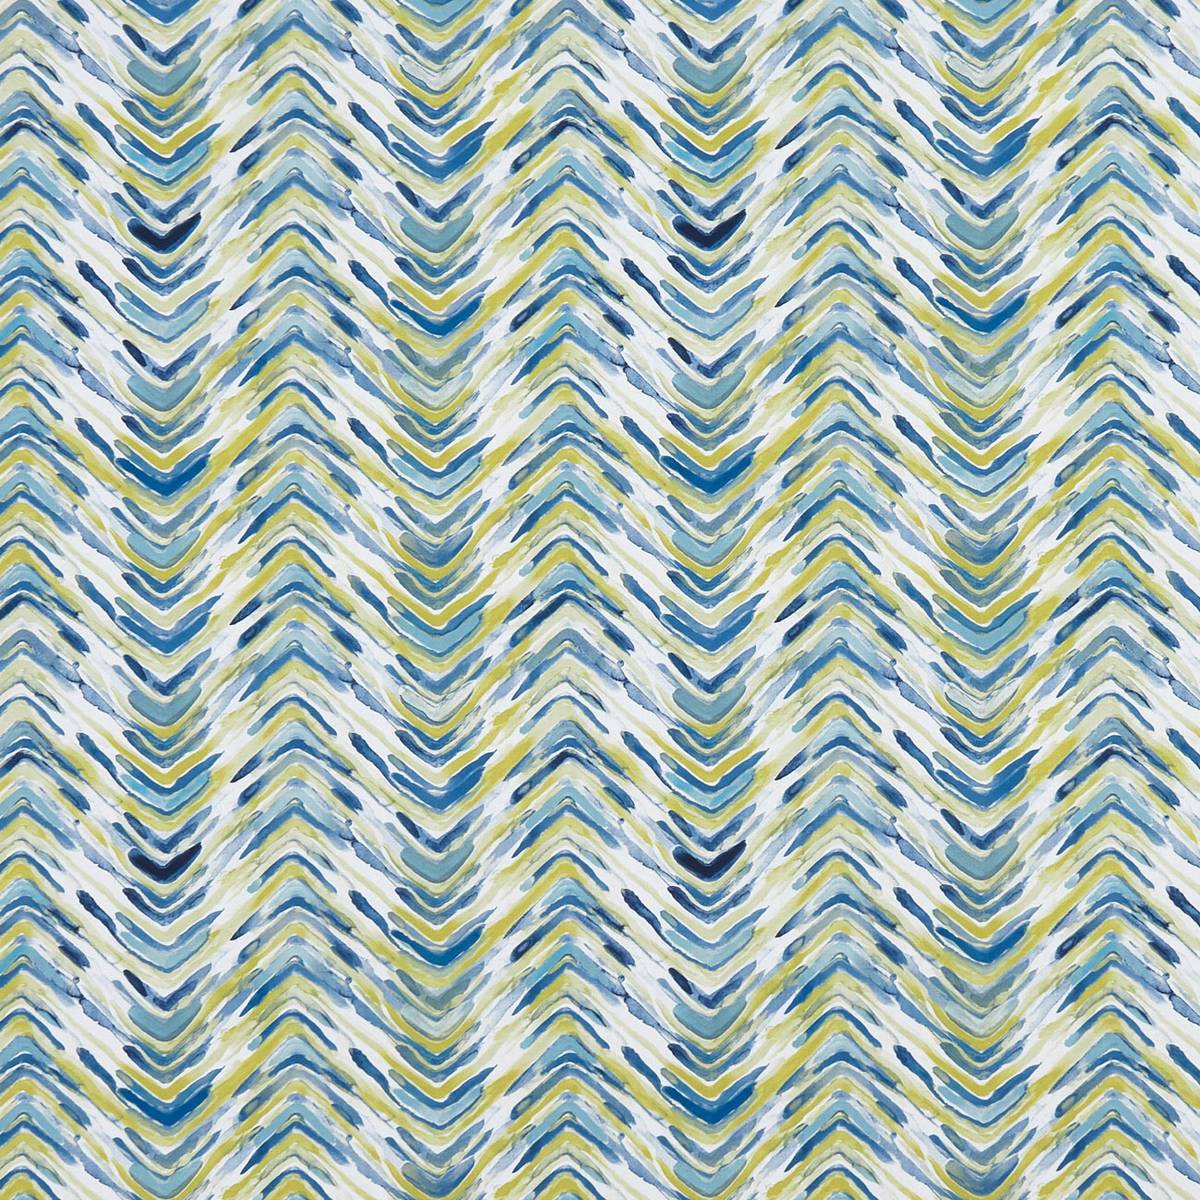 Medley Mineral Fabric by Studio G